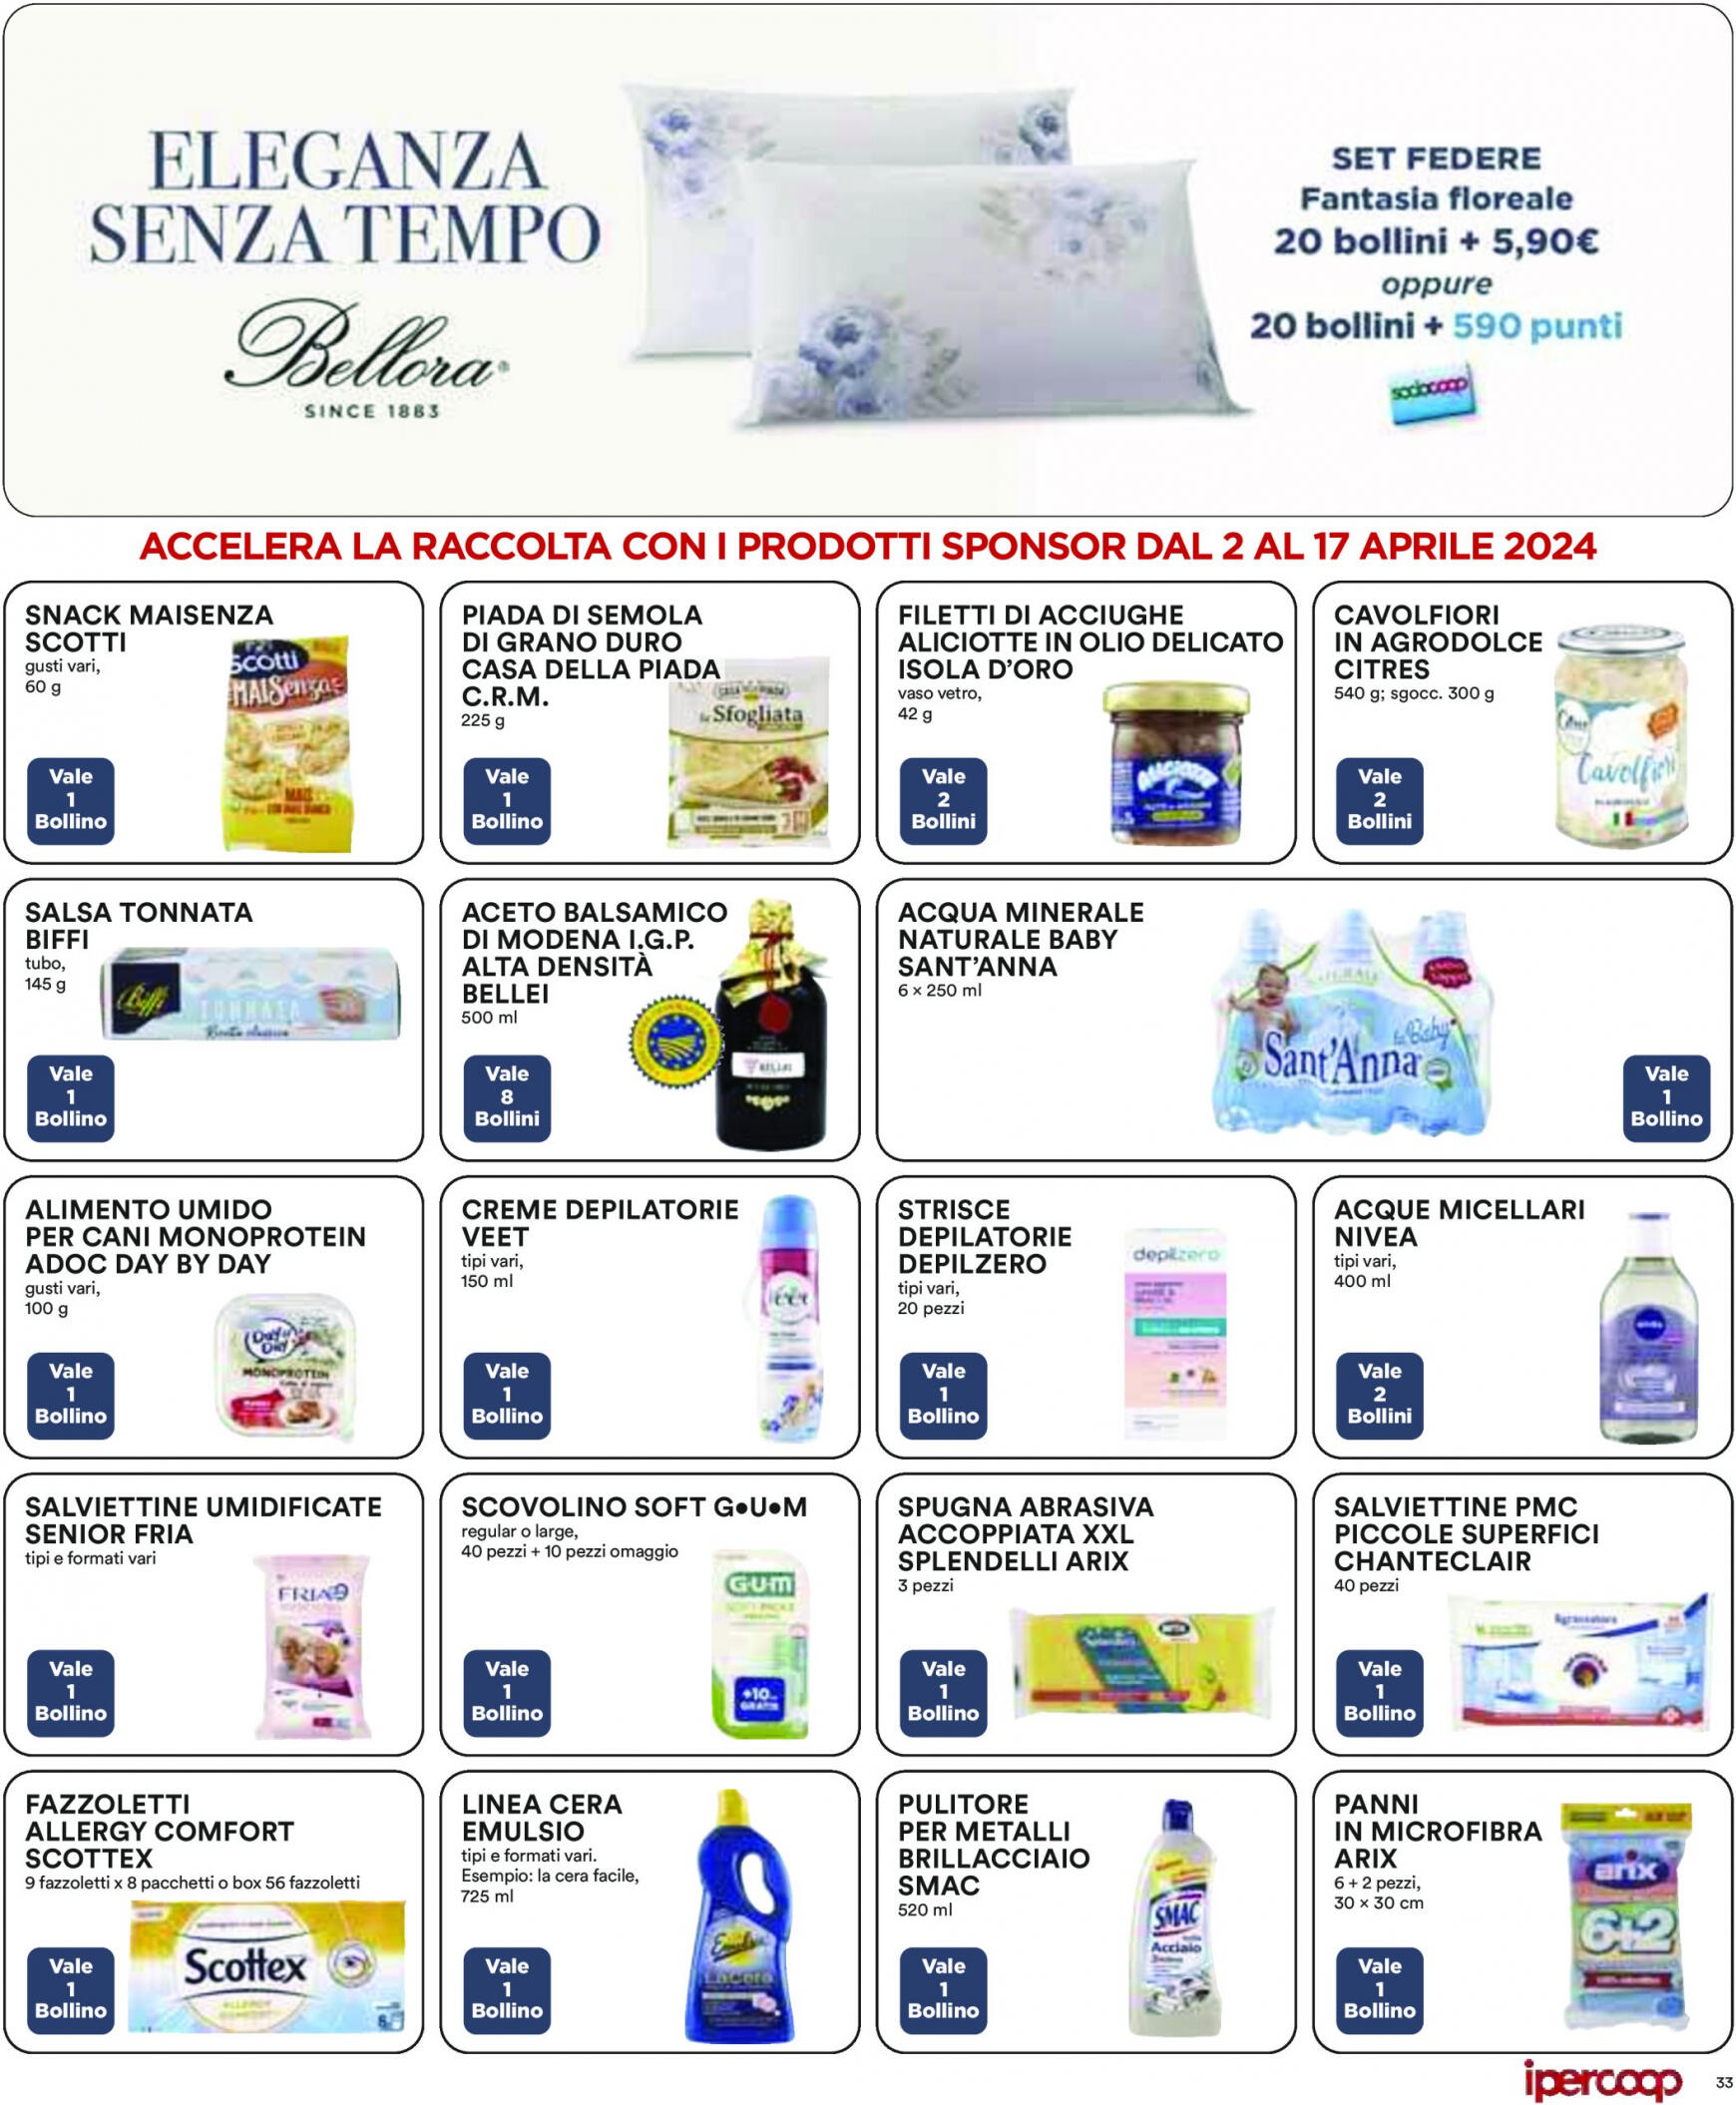 coop - Nuovo volantino Coop 02.04. - 17.04. - page: 33